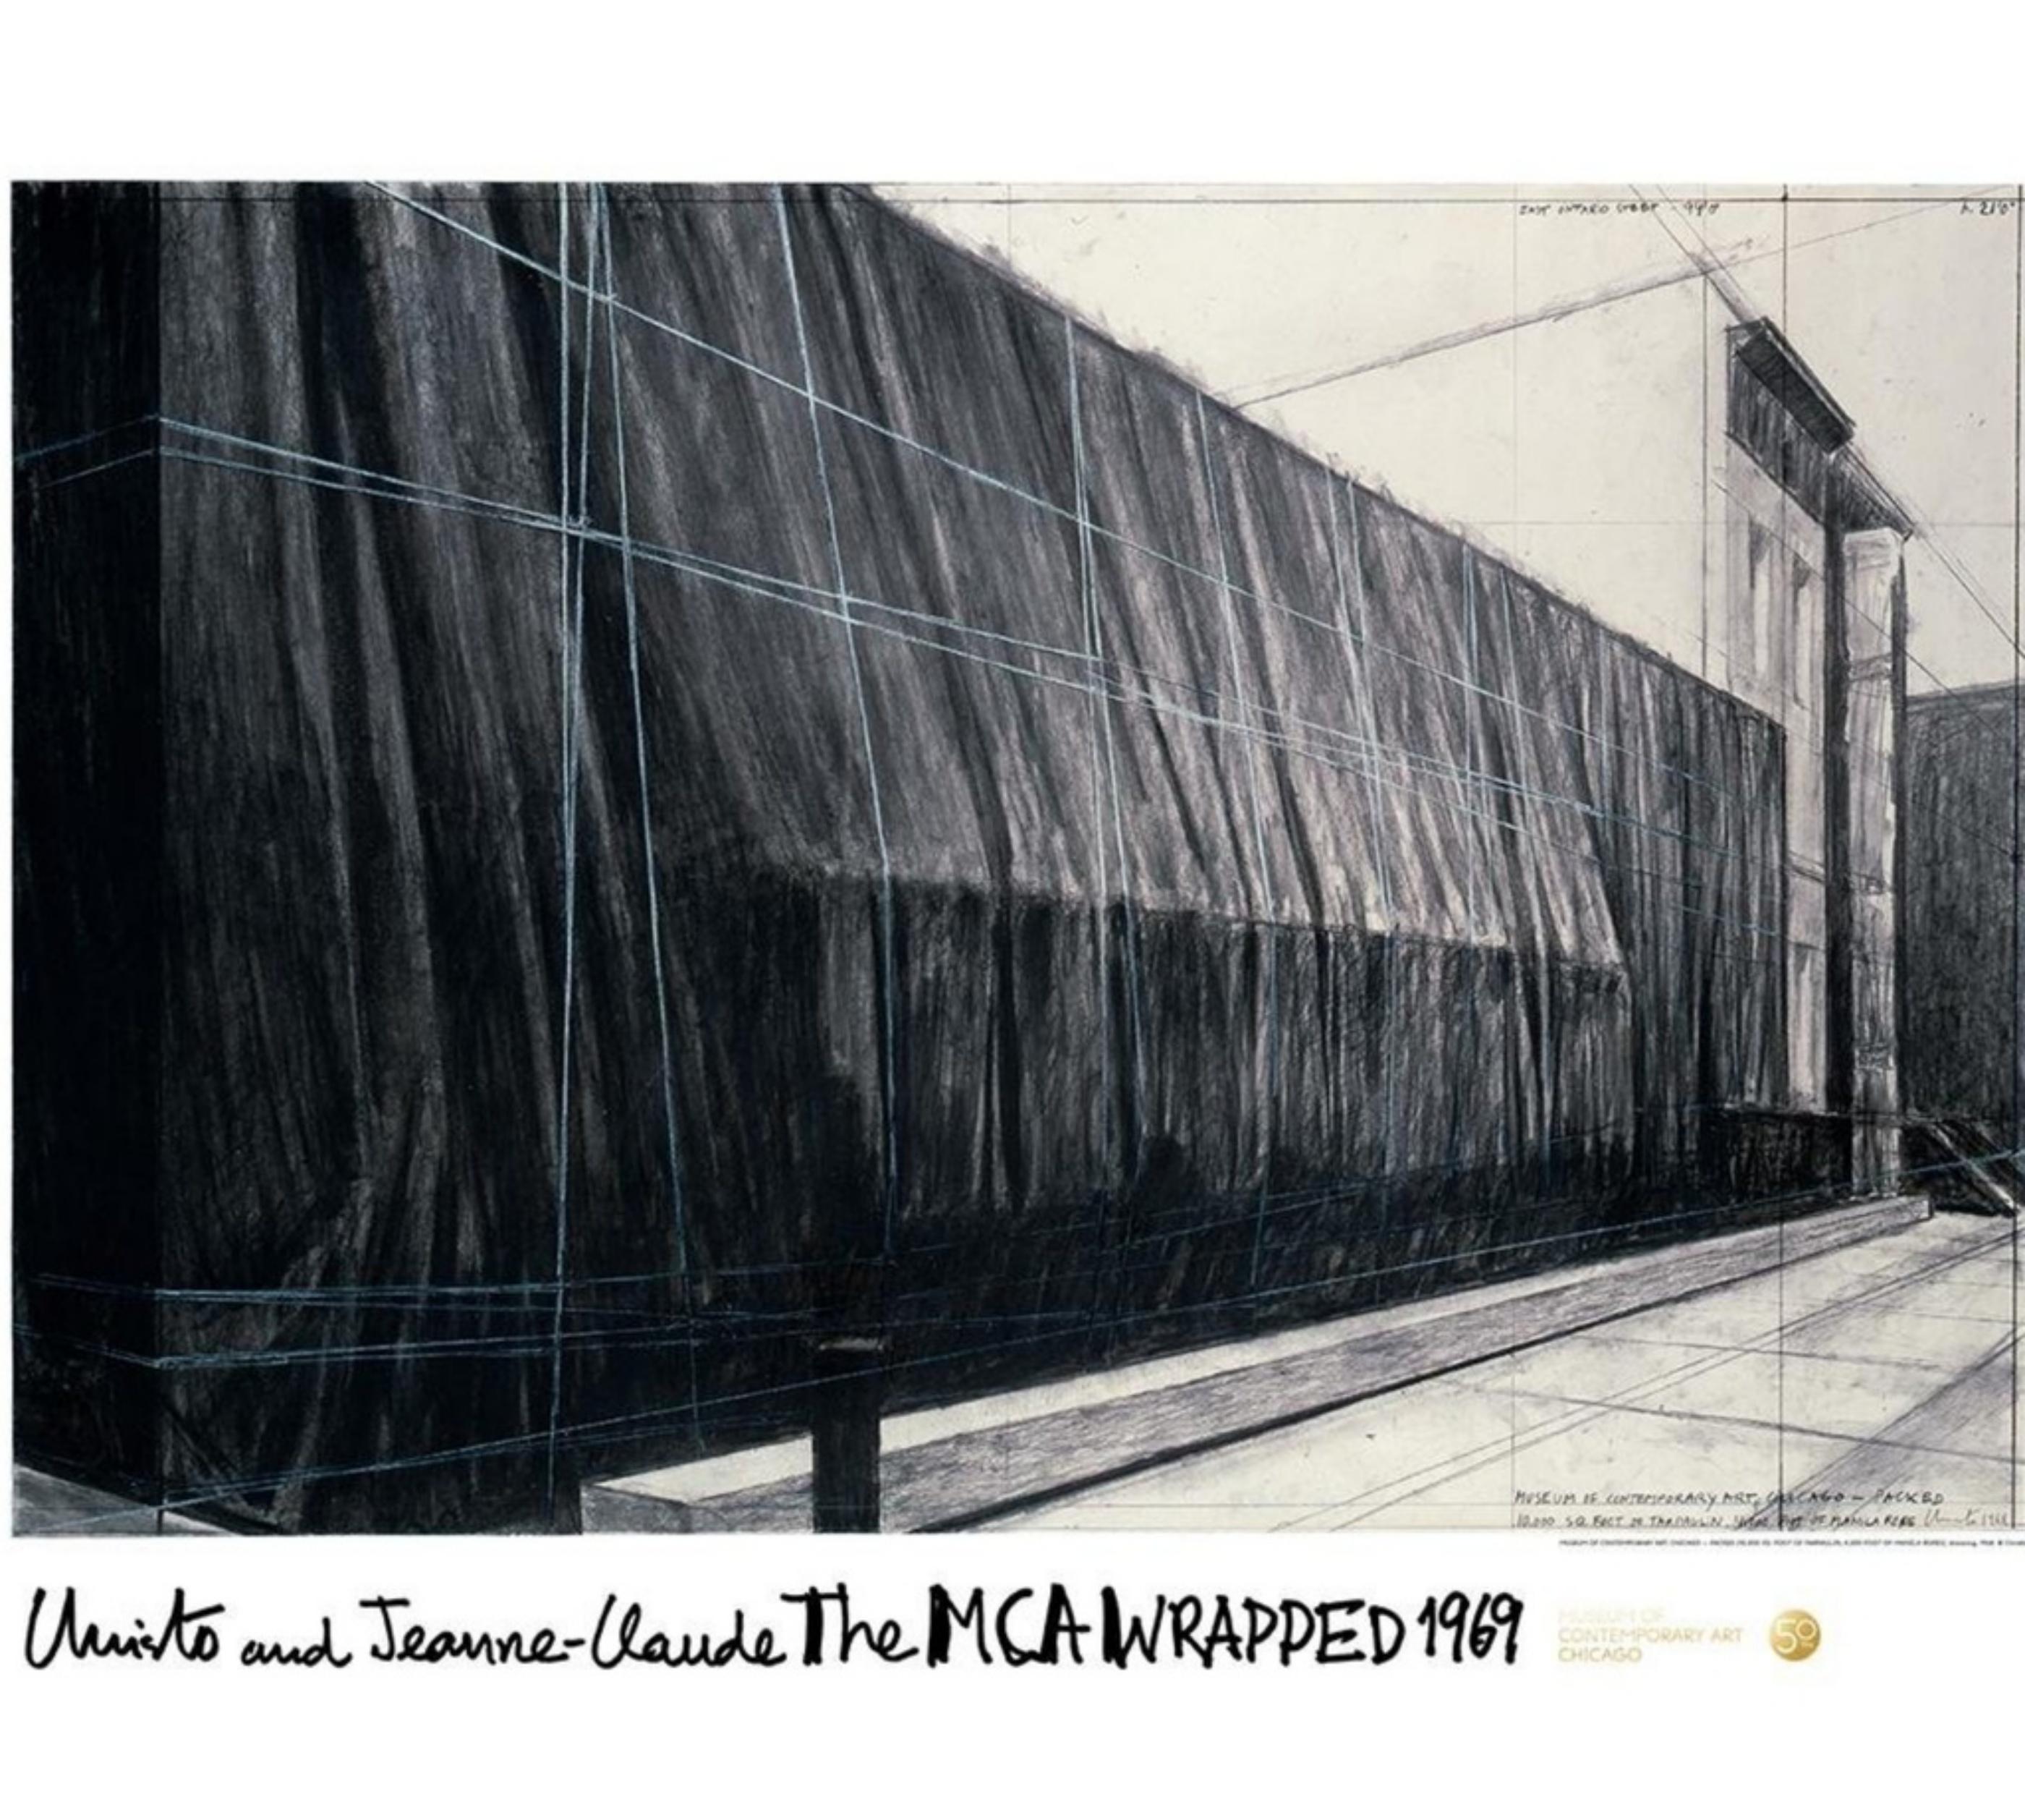 Christo Figurative Print - The MCA Wrapped, 1969 (Limited Edition of 300) gold foil stamp museum provenance